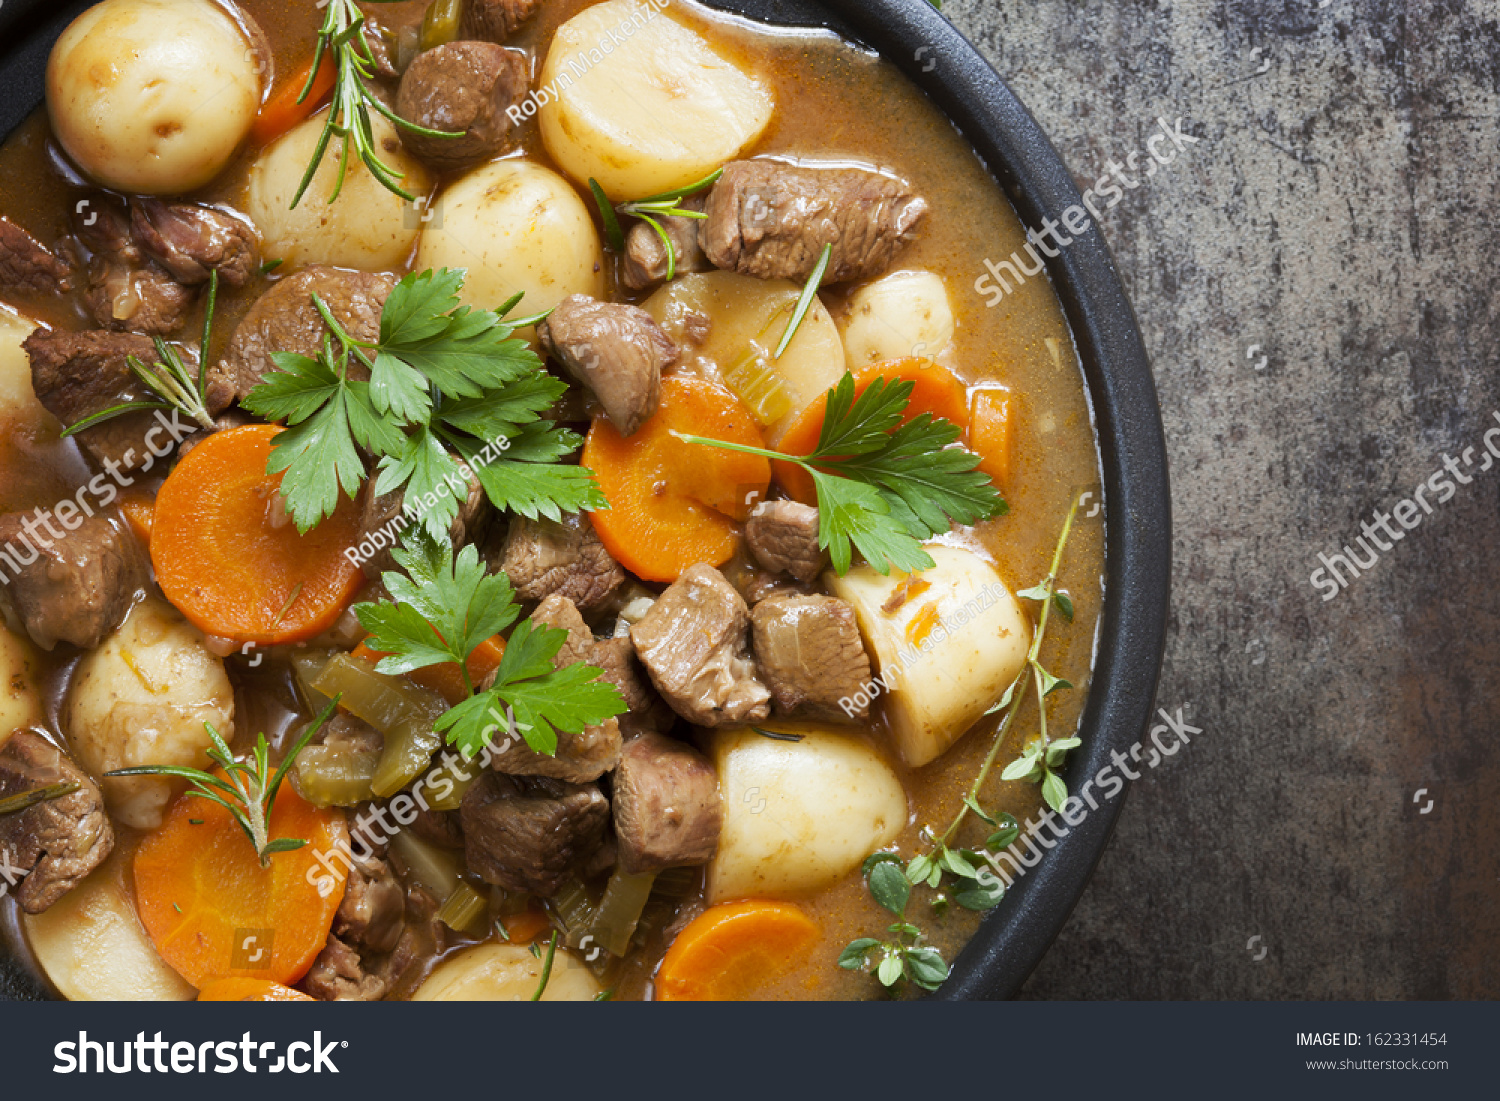 Irish stew, made with lamb, stout, potatoes, carrots and herbs. #162331454